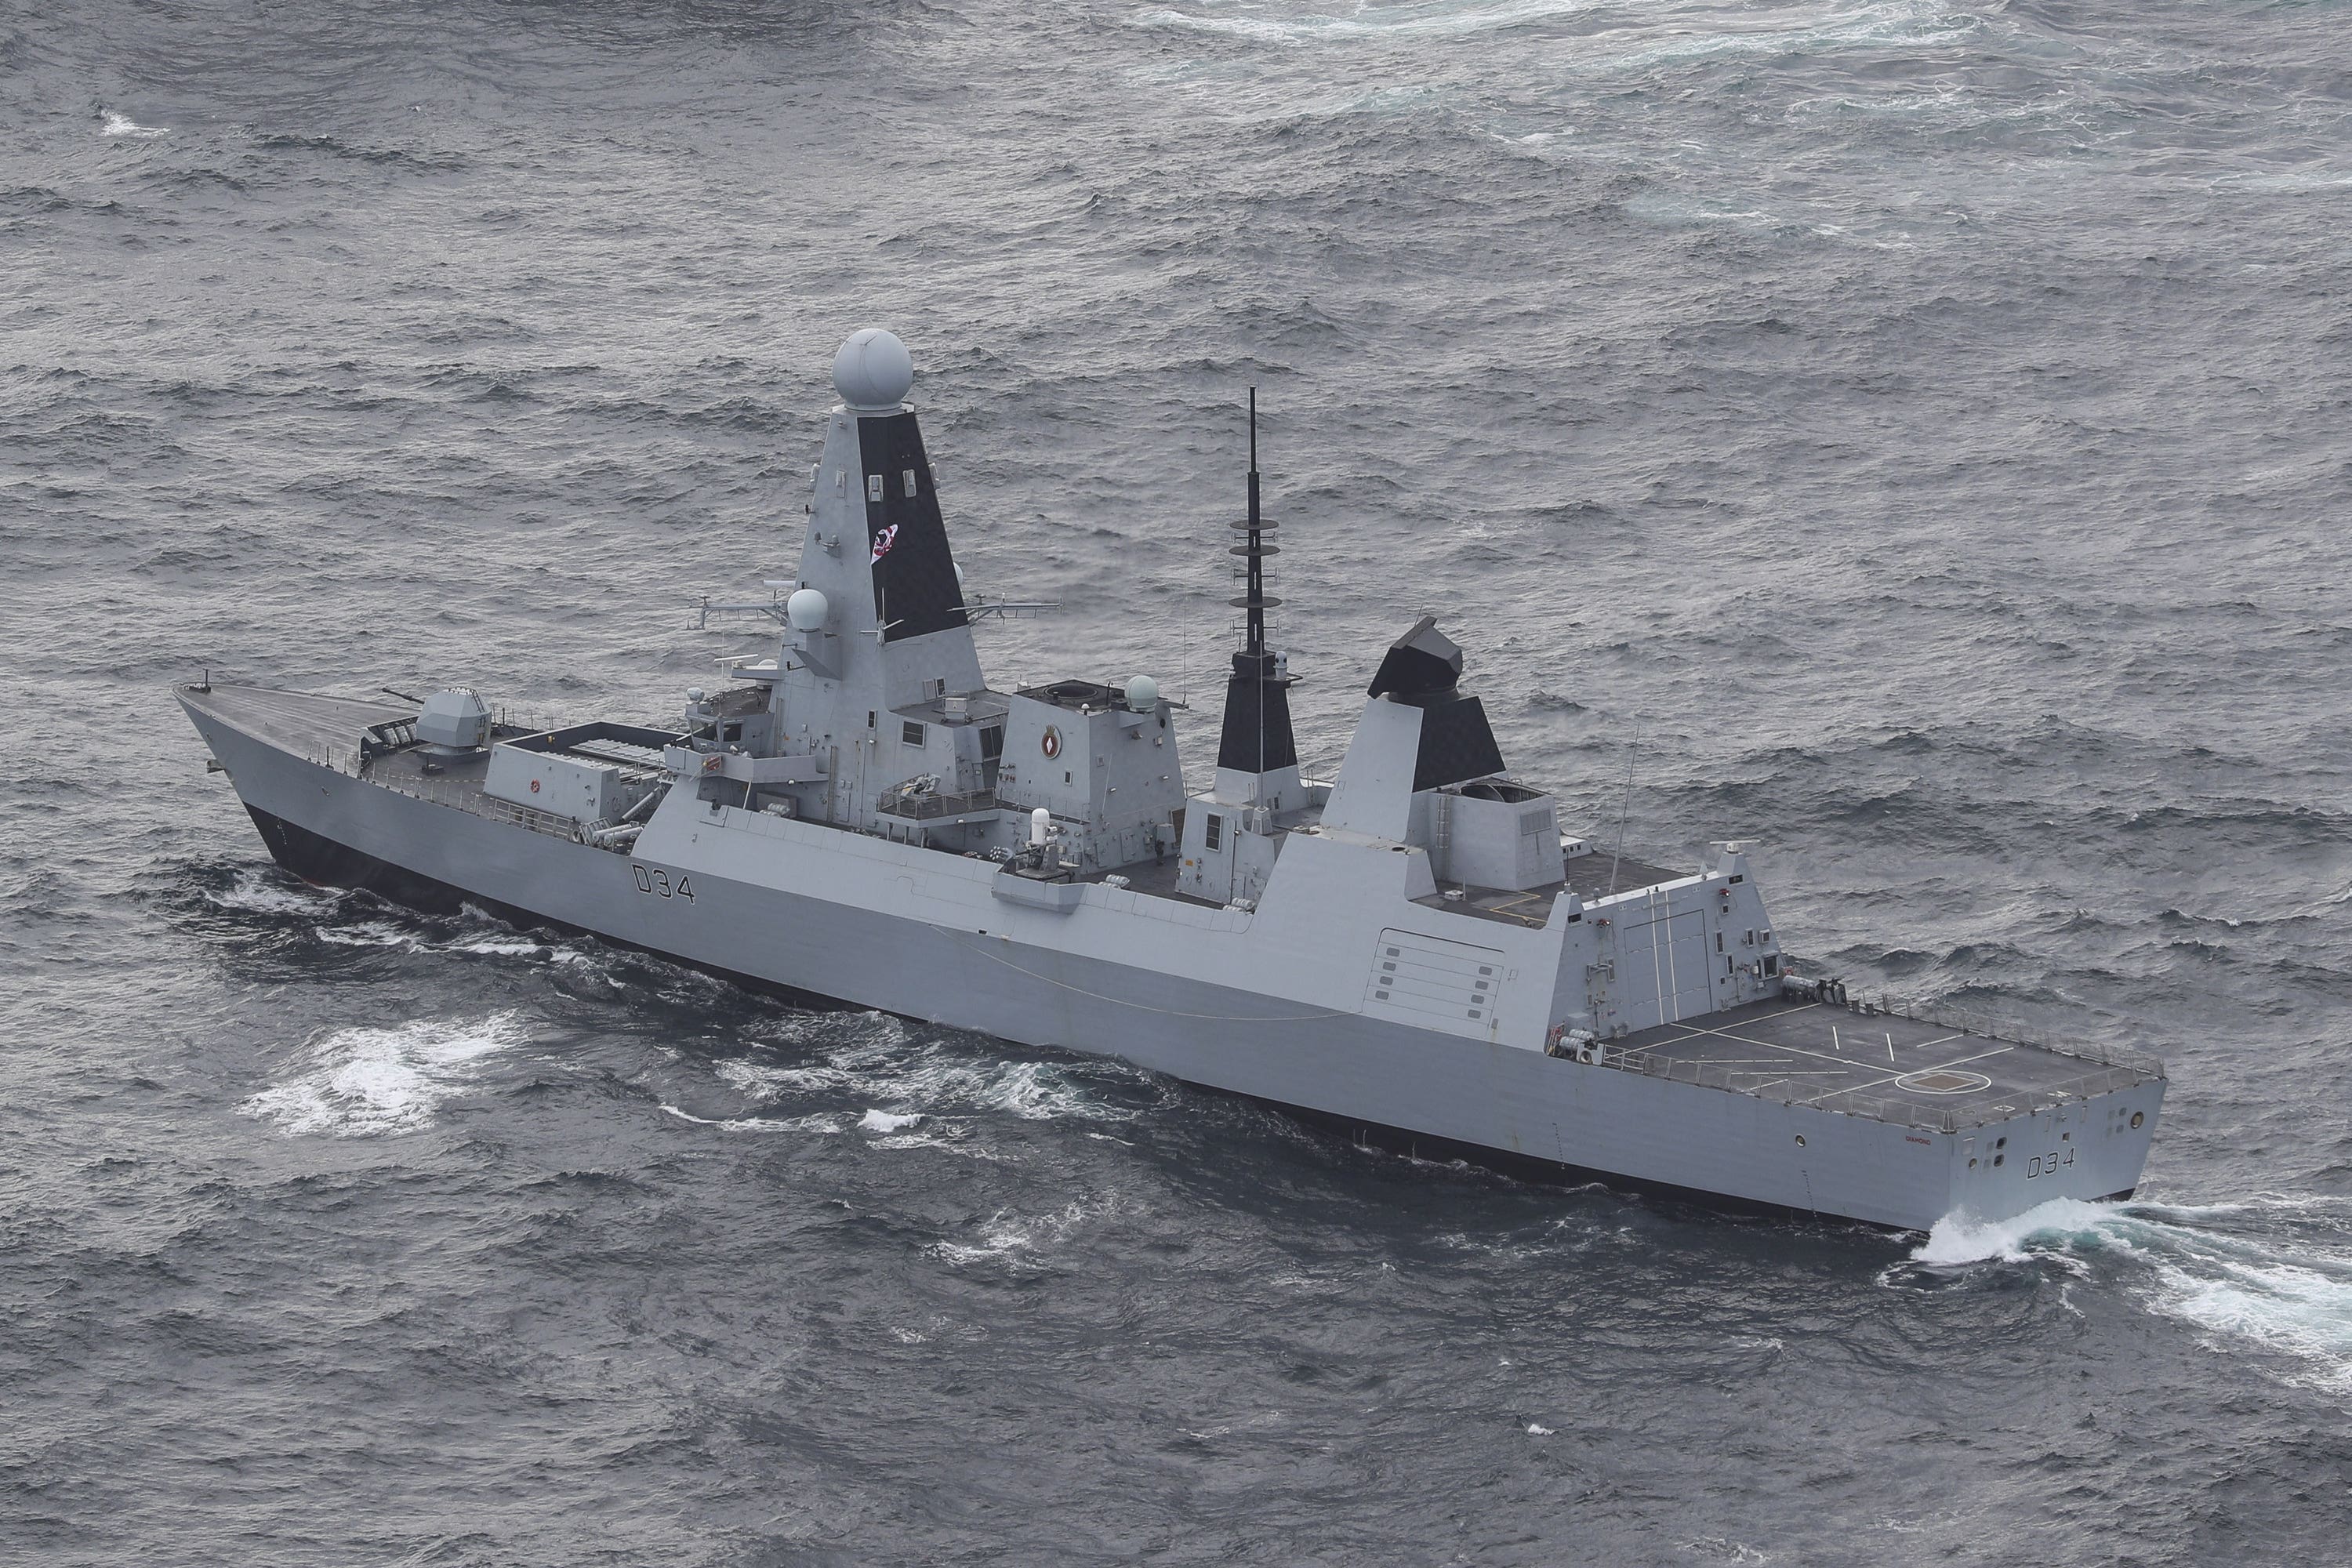 HMS Diamond joined international efforts last month to deter attacks on cargo ships in the ‘critical waterway’